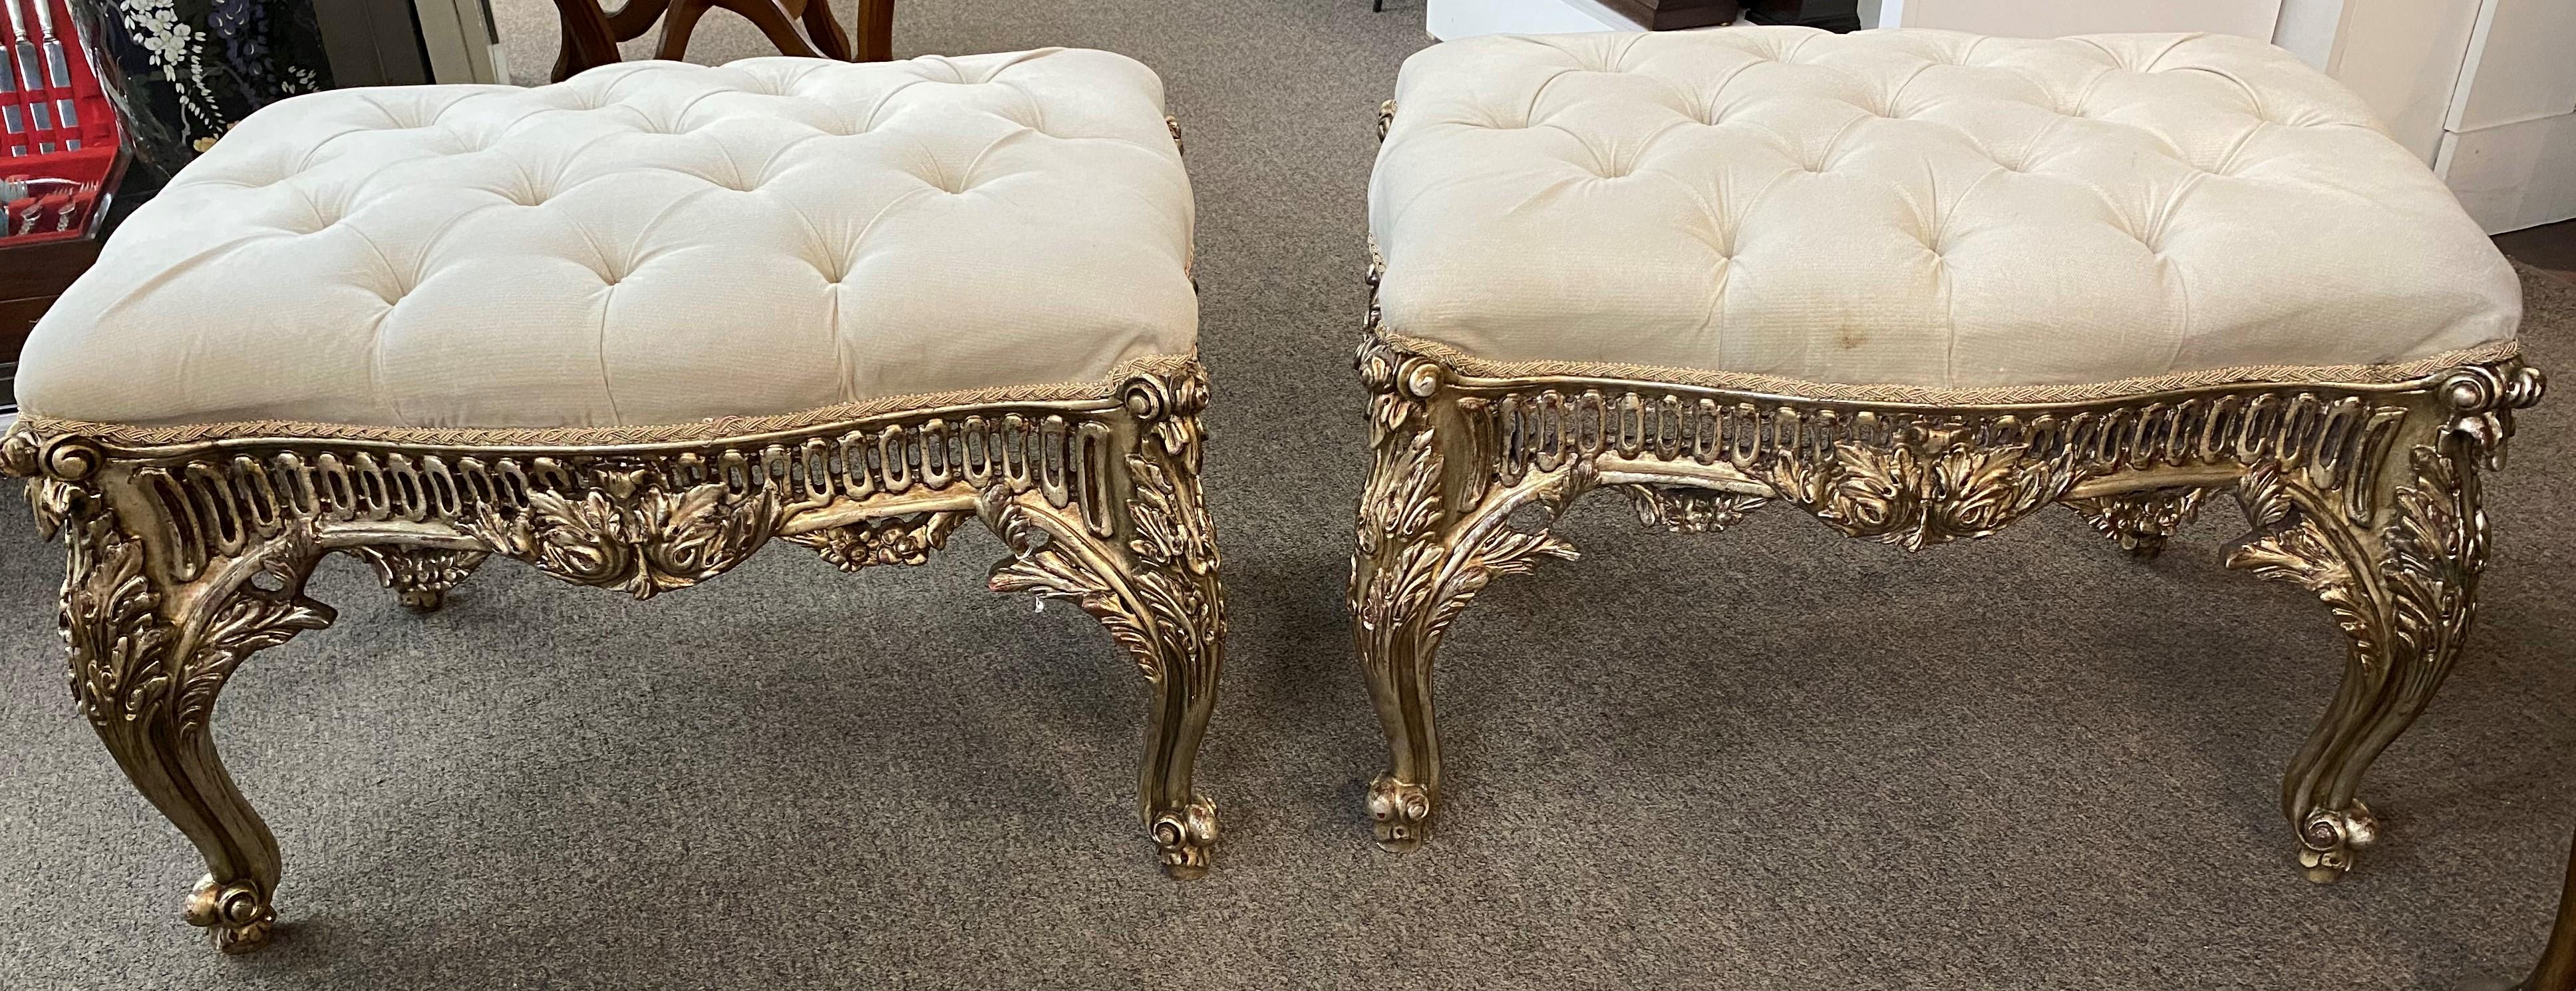 Pair of Baroque or Rococo Style Pierce Carved Silvered Ottomans For Sale 1